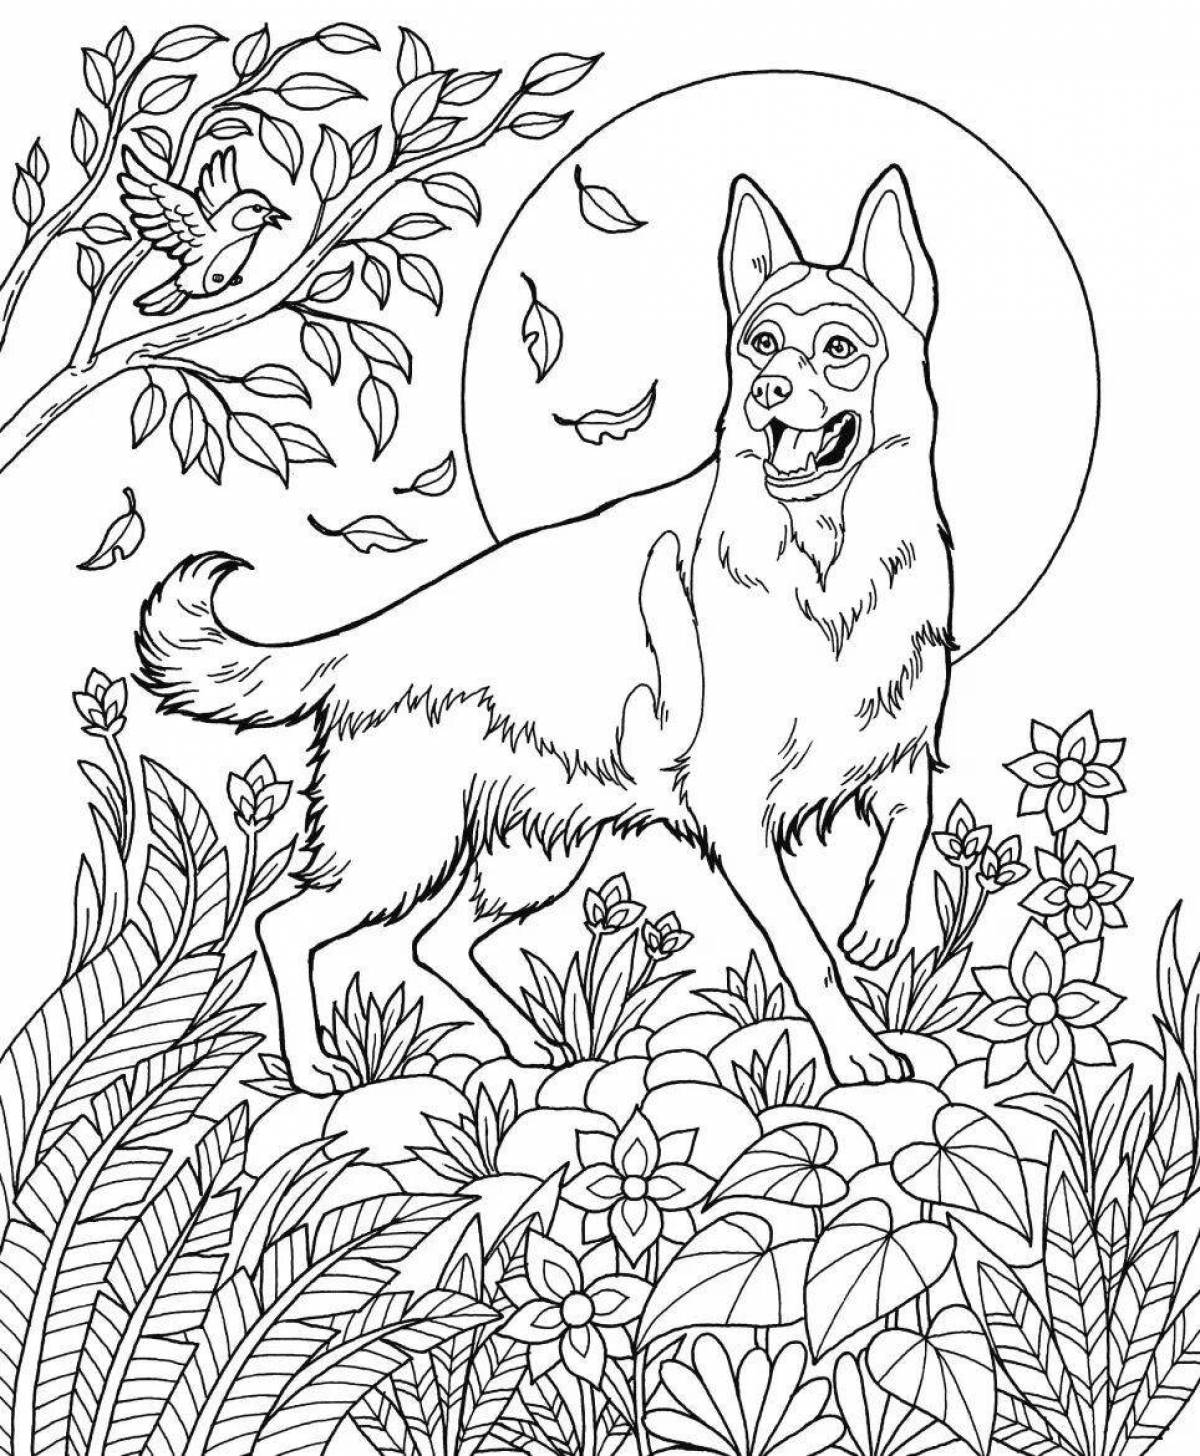 Royal fire dog coloring page